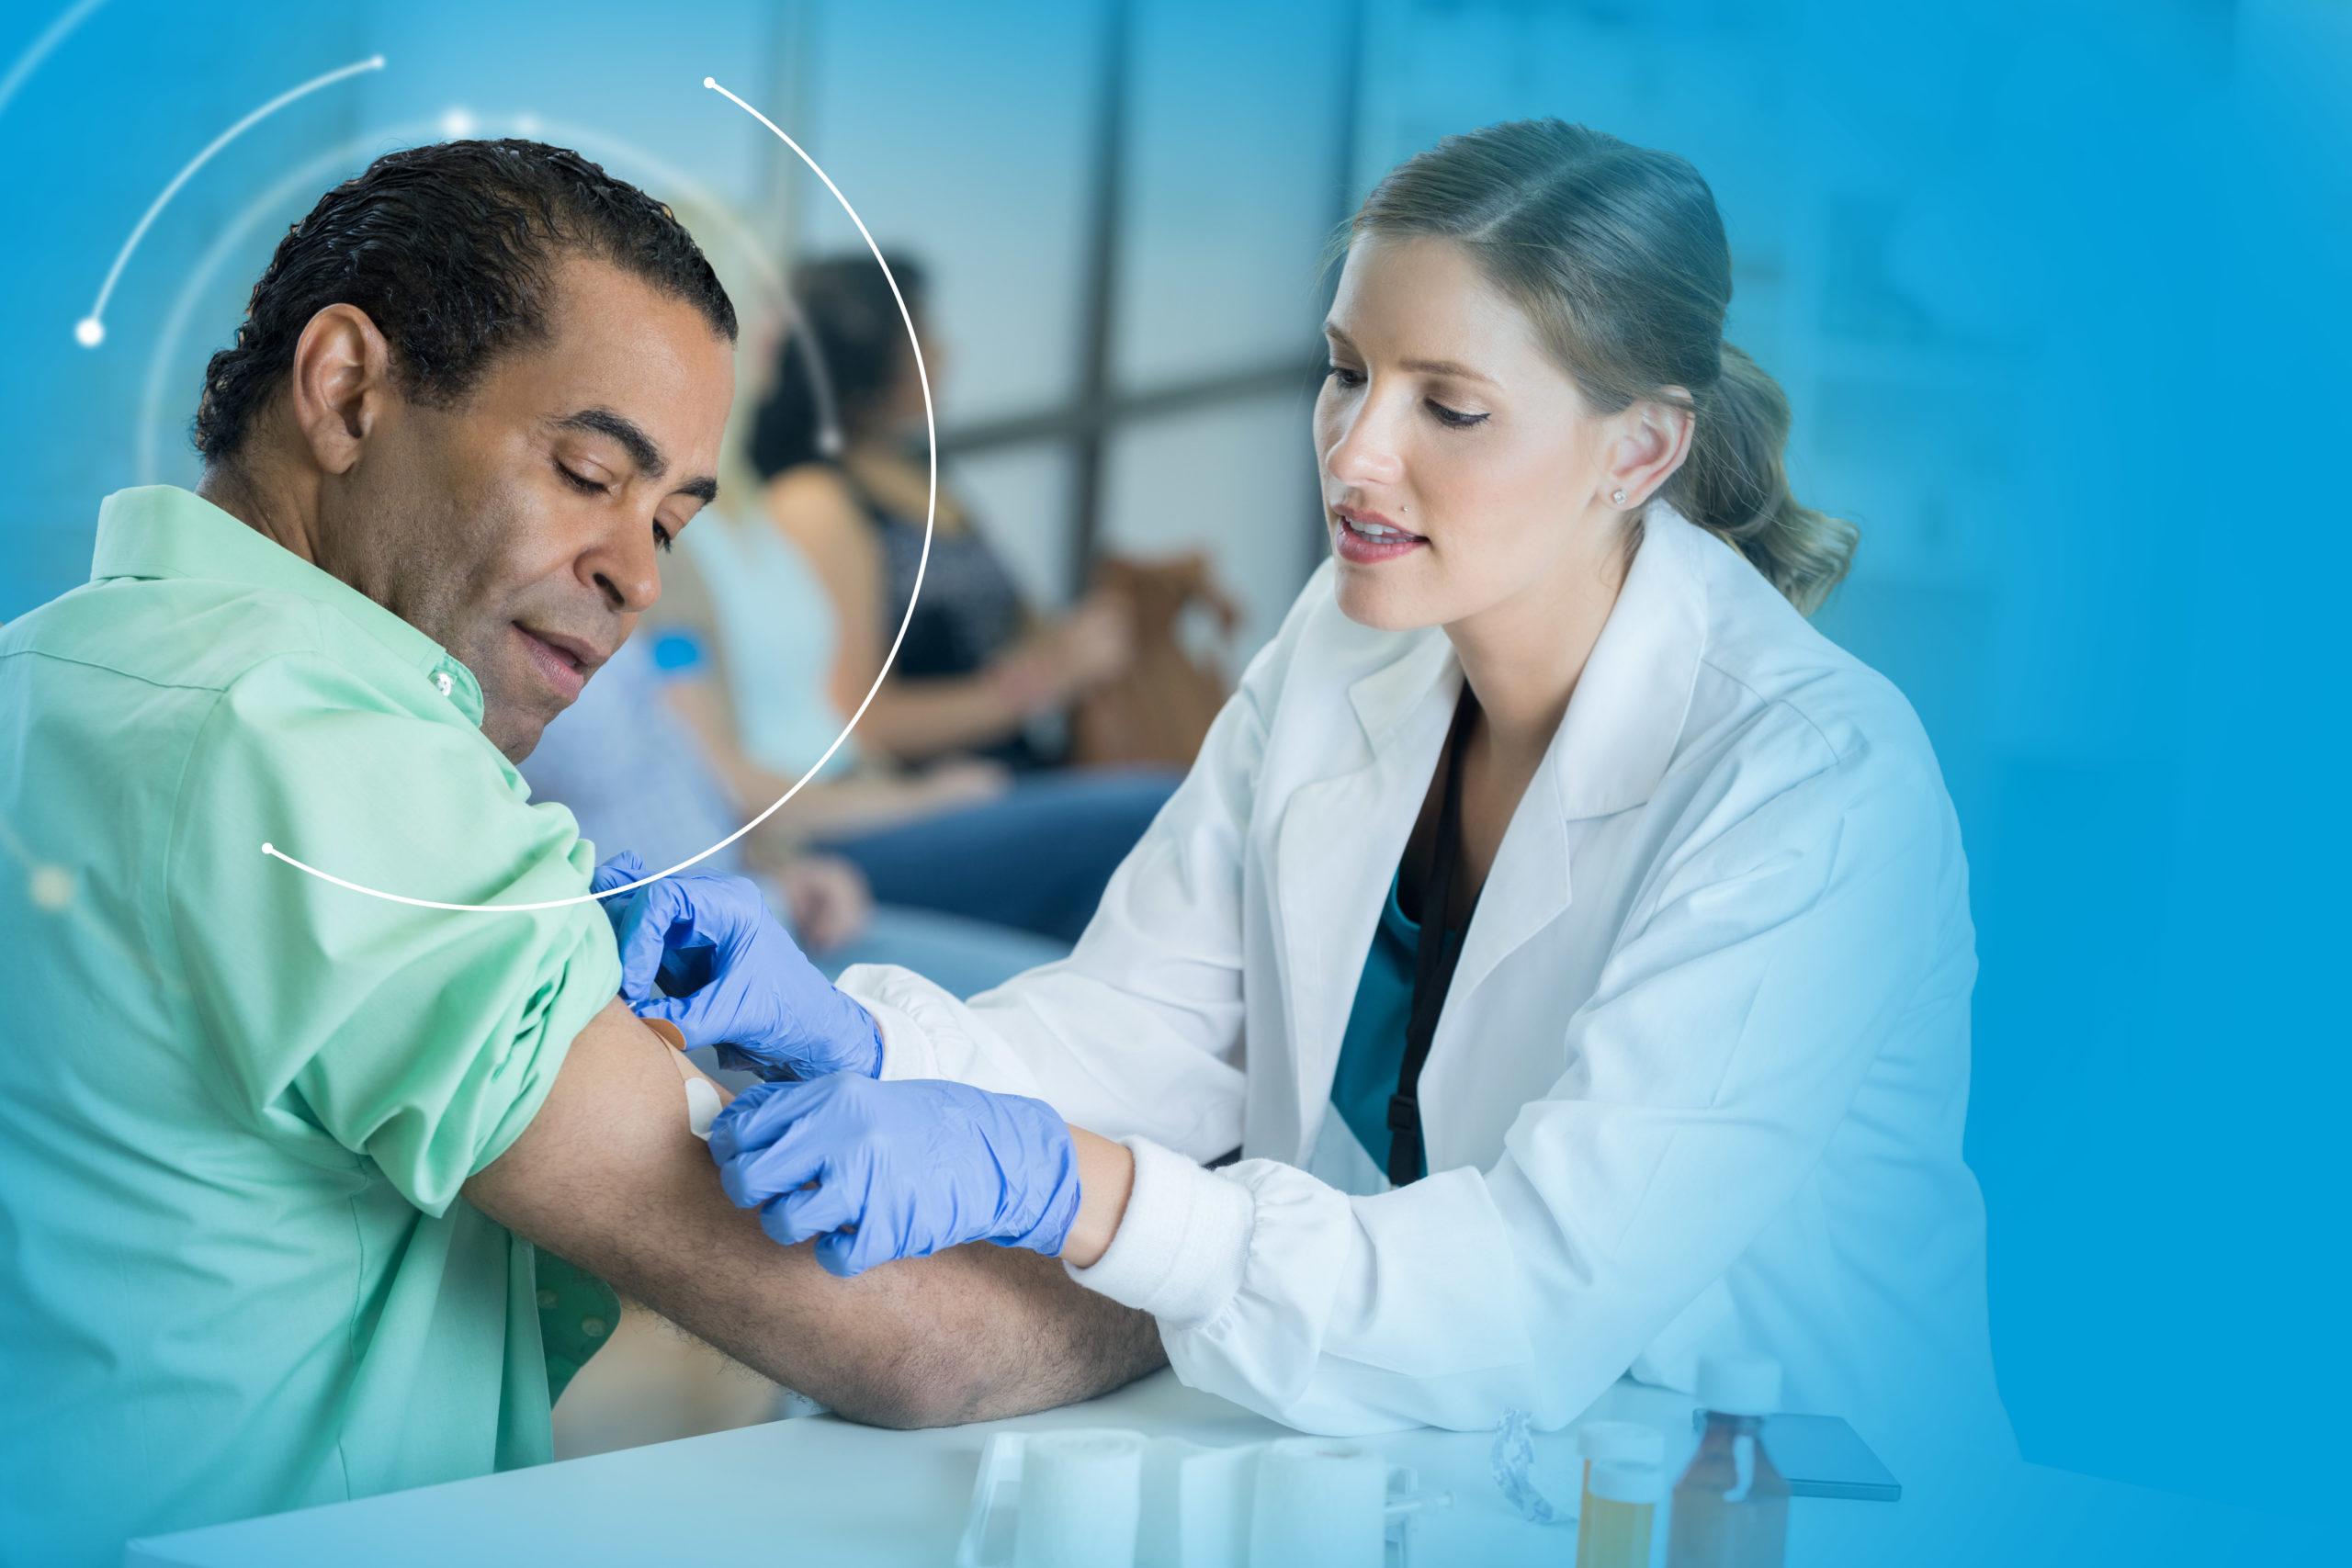 How to Address Changes in Patient Engagement and Motivate Flu Vaccination Fulfillment